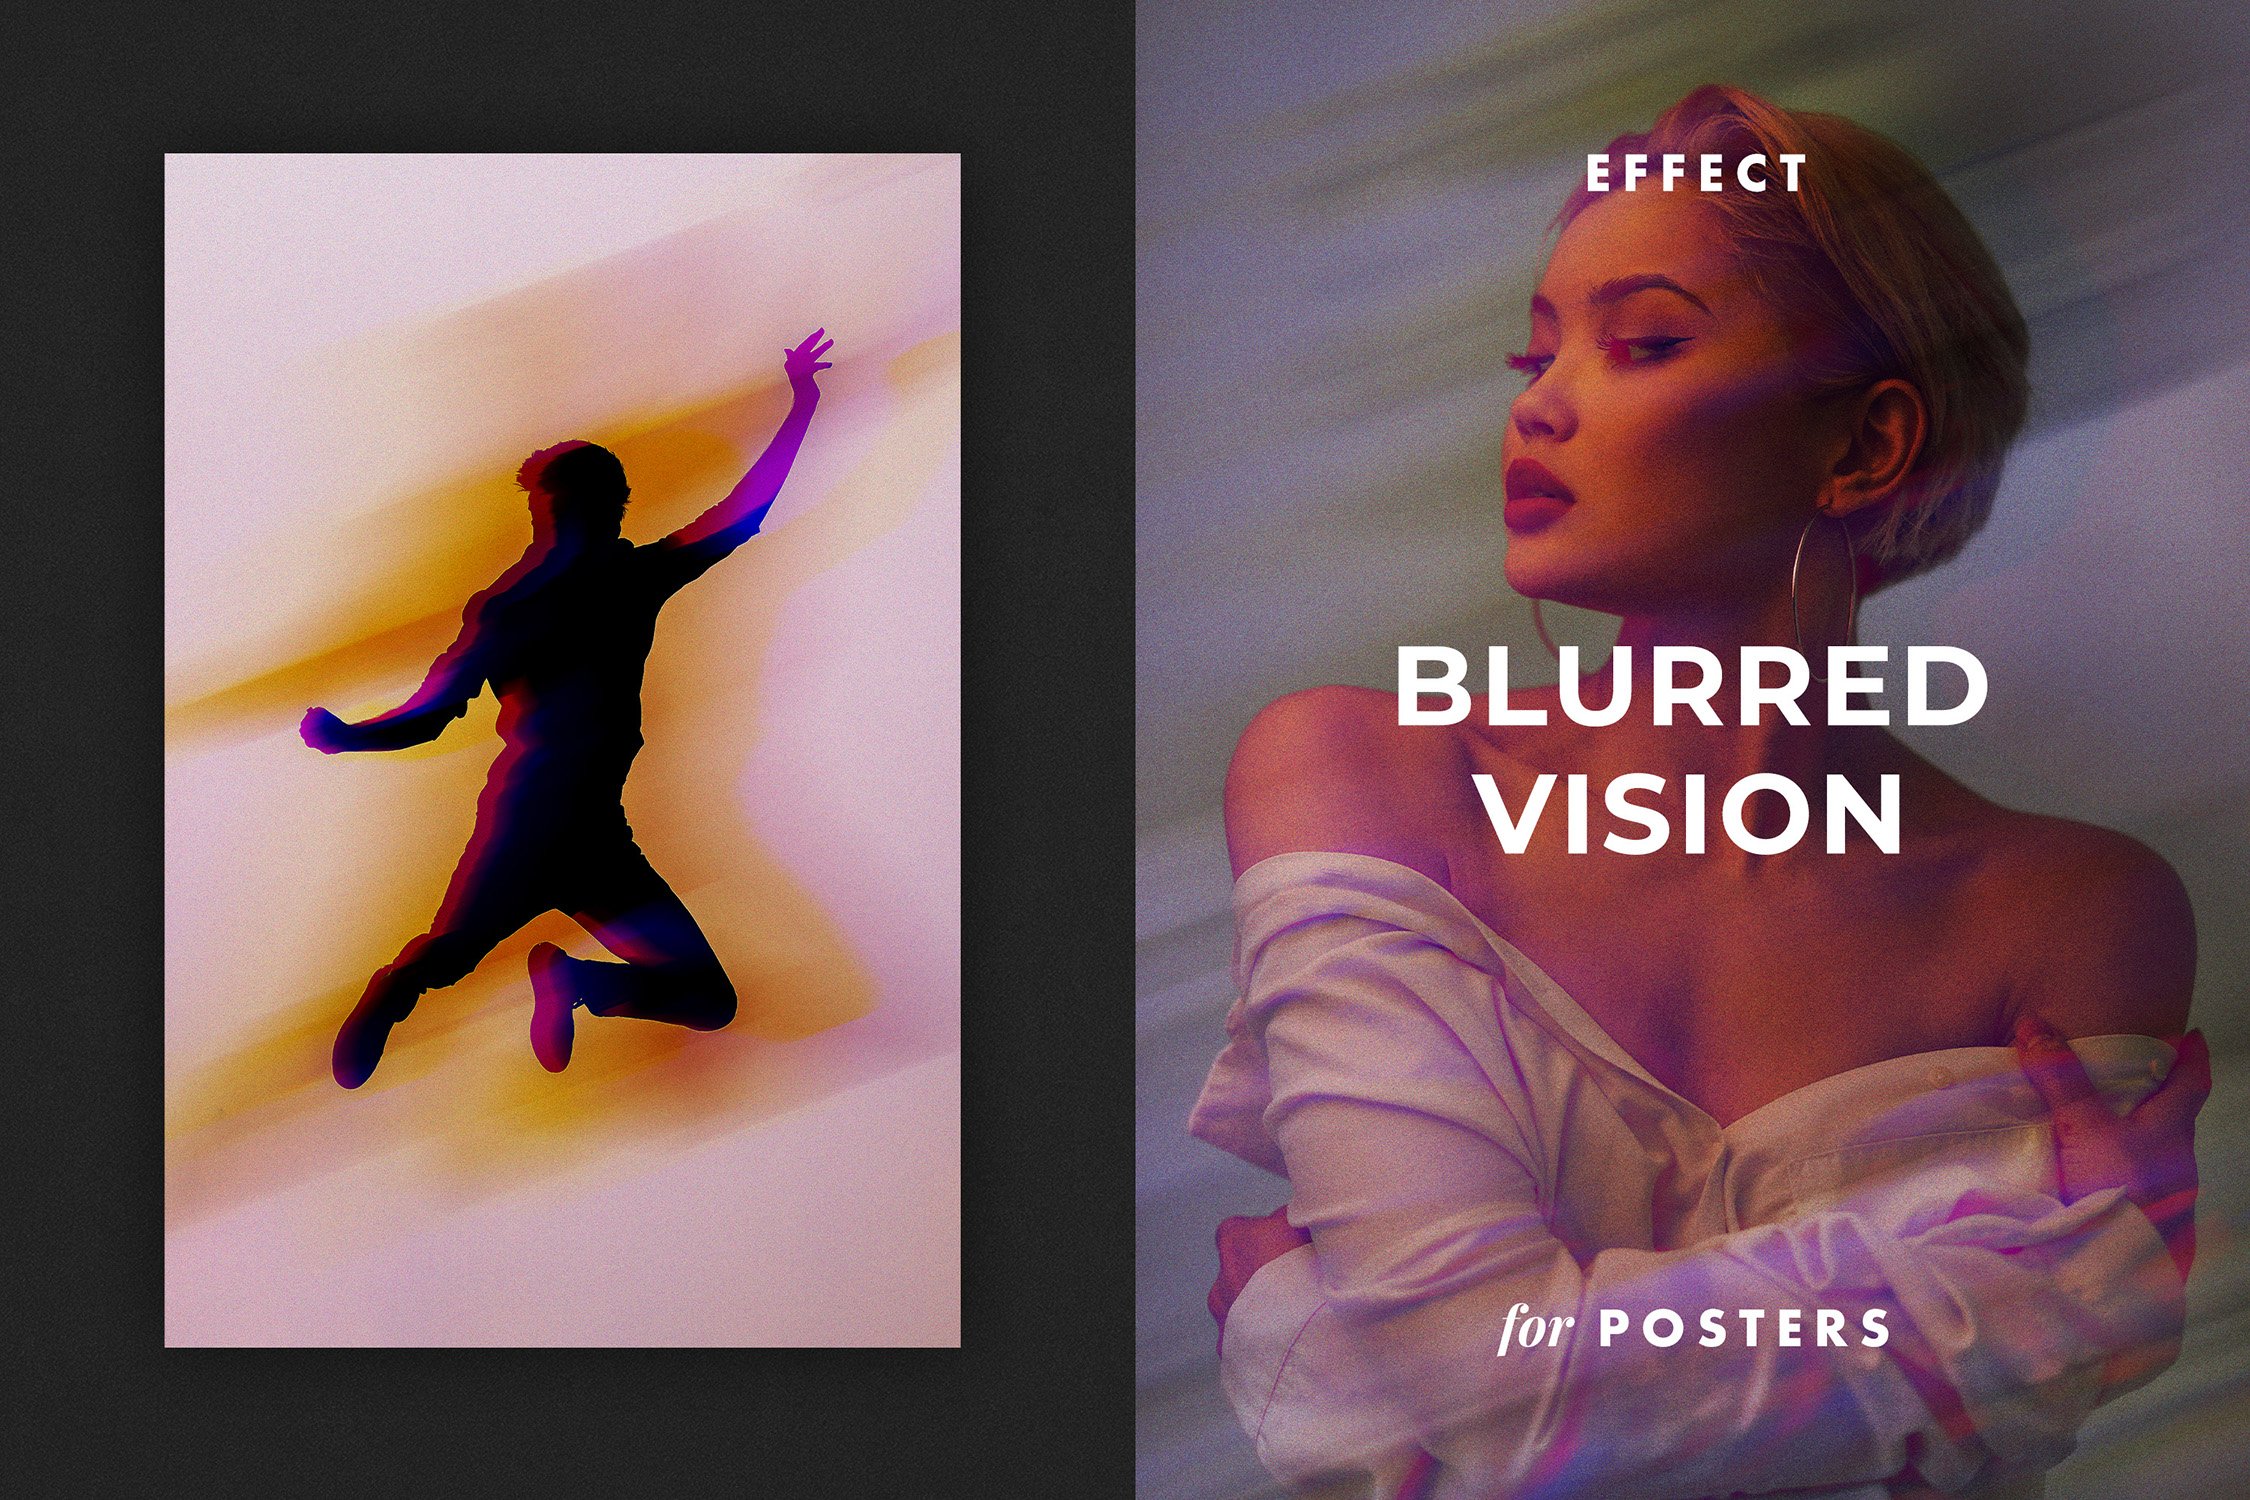 Blurred Vision Effect for Posterscover image.